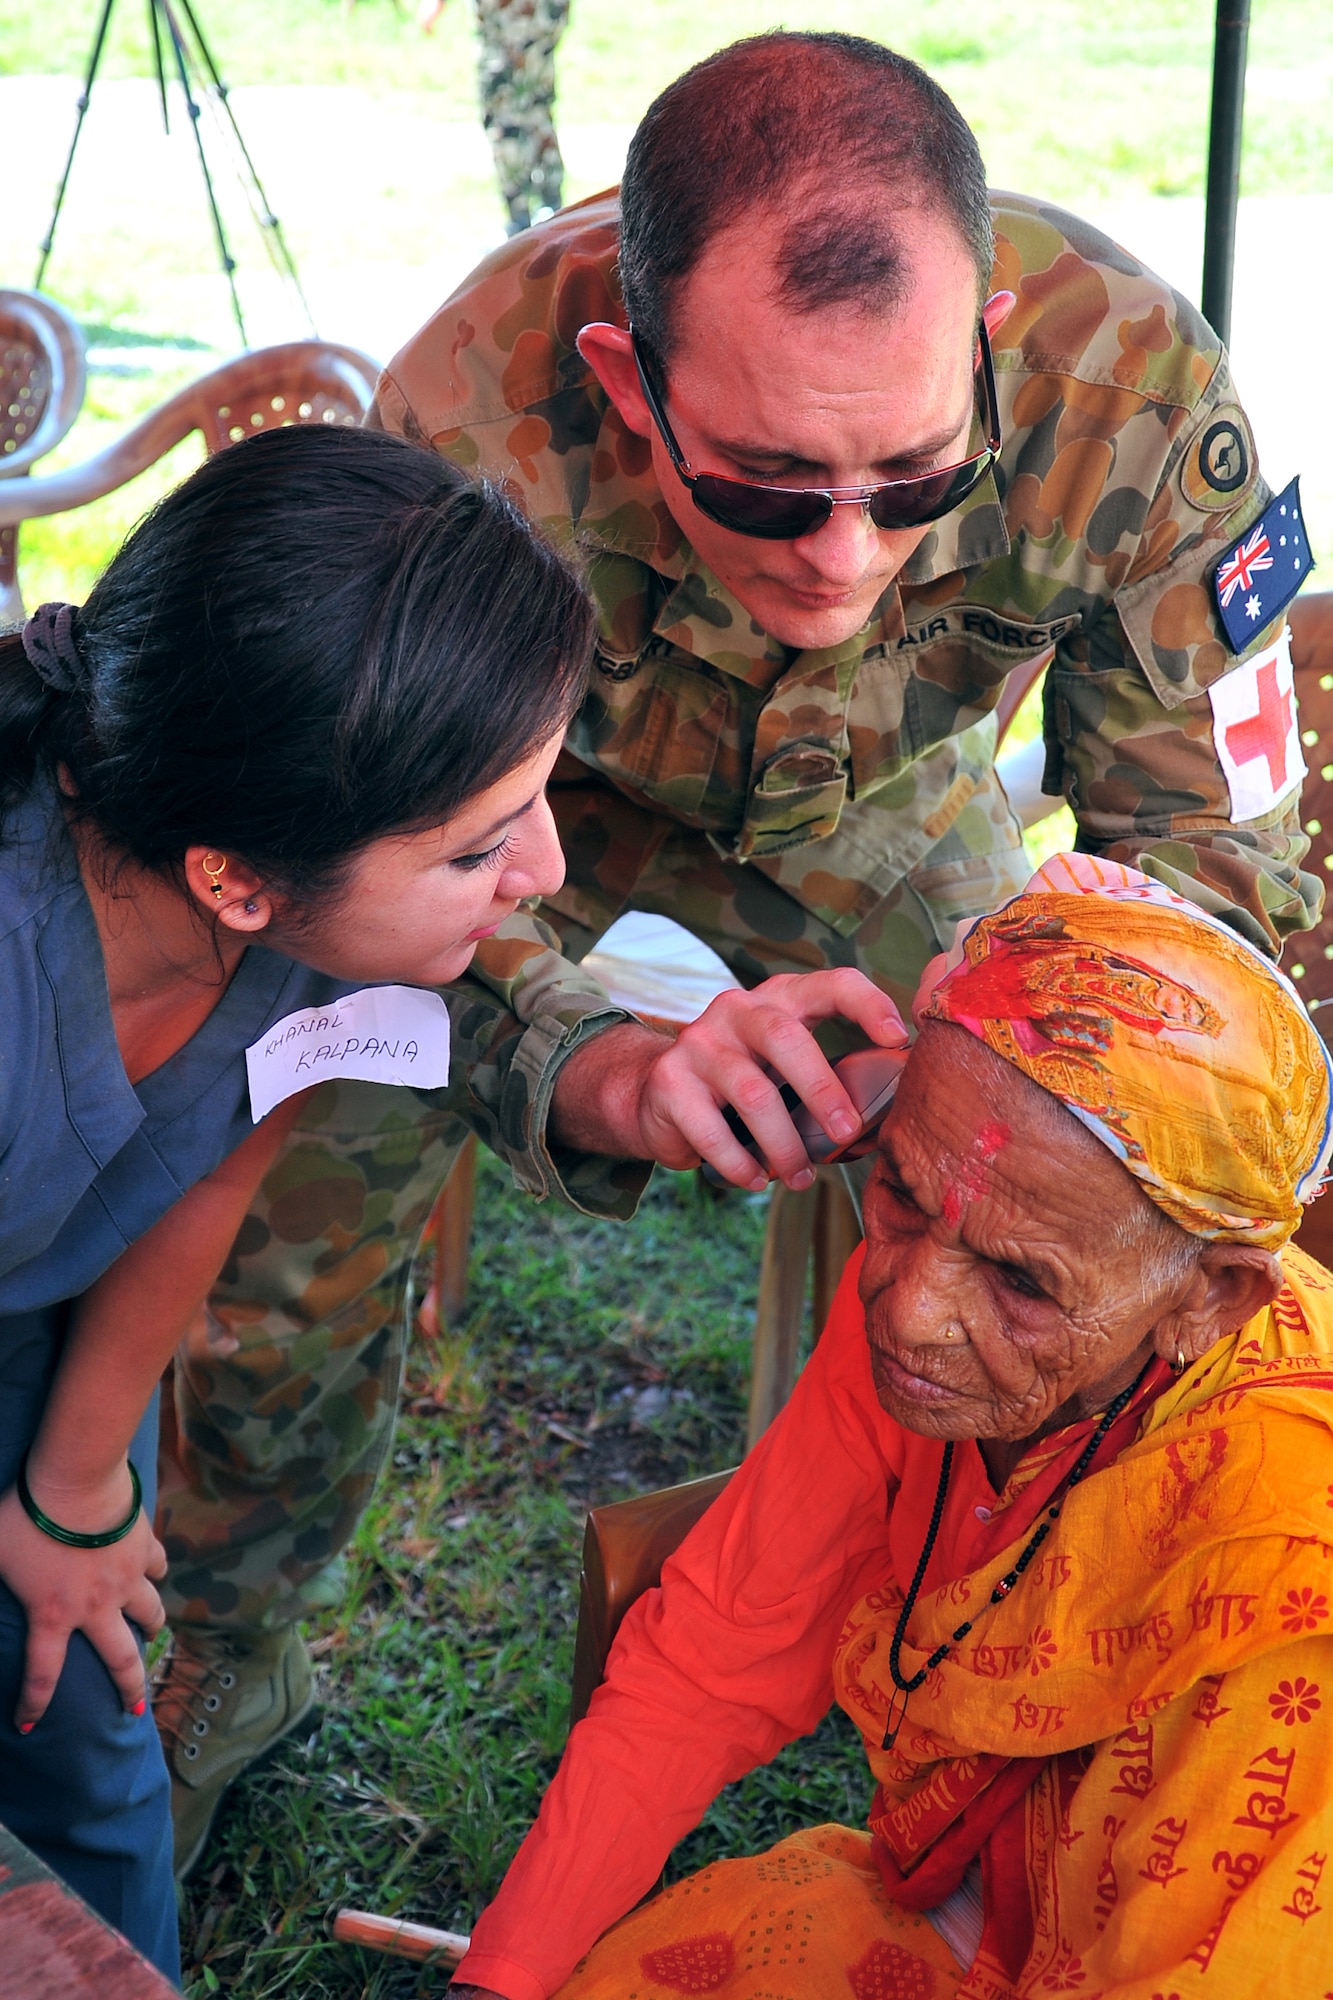 Royal Australian Air Force Leading Aircraftsman Michael Youngberry, Operation Pacific Angel-Nepal medical assistant, takes a patient’s vital signs at a health services outreach location in Manahari, Nepal, Sept. 8, 2014. PACANGEL helps cultivate common bonds and foster goodwill between the U.S., Nepal and regional nations by conducting multilateral humanitarian assistance and civil military operations. (U.S. Air Force photo by Staff Sgt. Melissa B. White/Released)